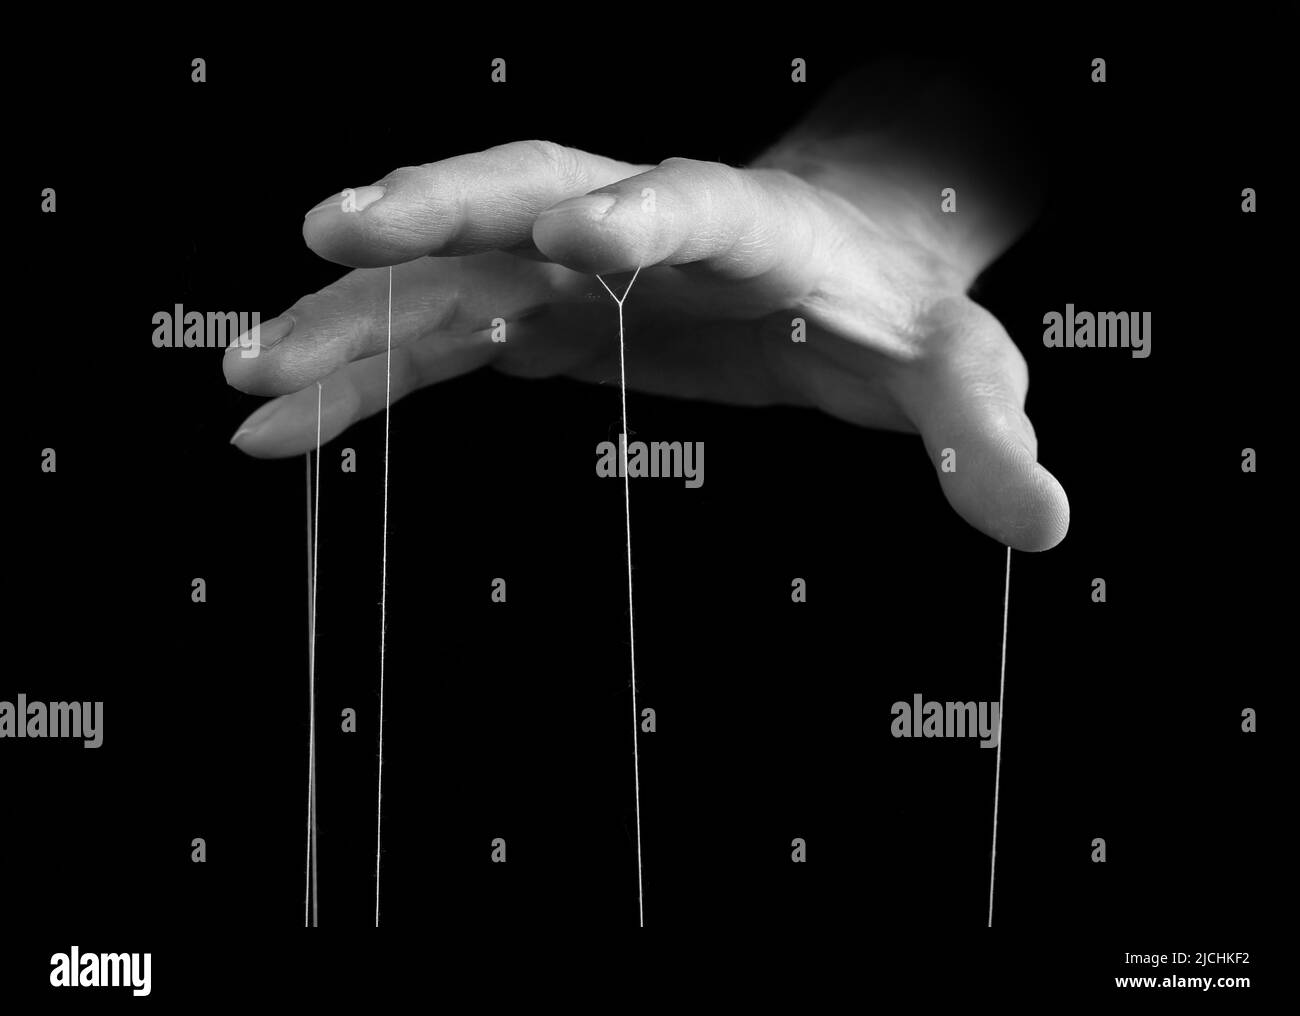 Man hand with strings on fingers. Suffering from drug, gambling, internet addiction or manipulation, influence concept. Black and white. High quality photo Stock Photo